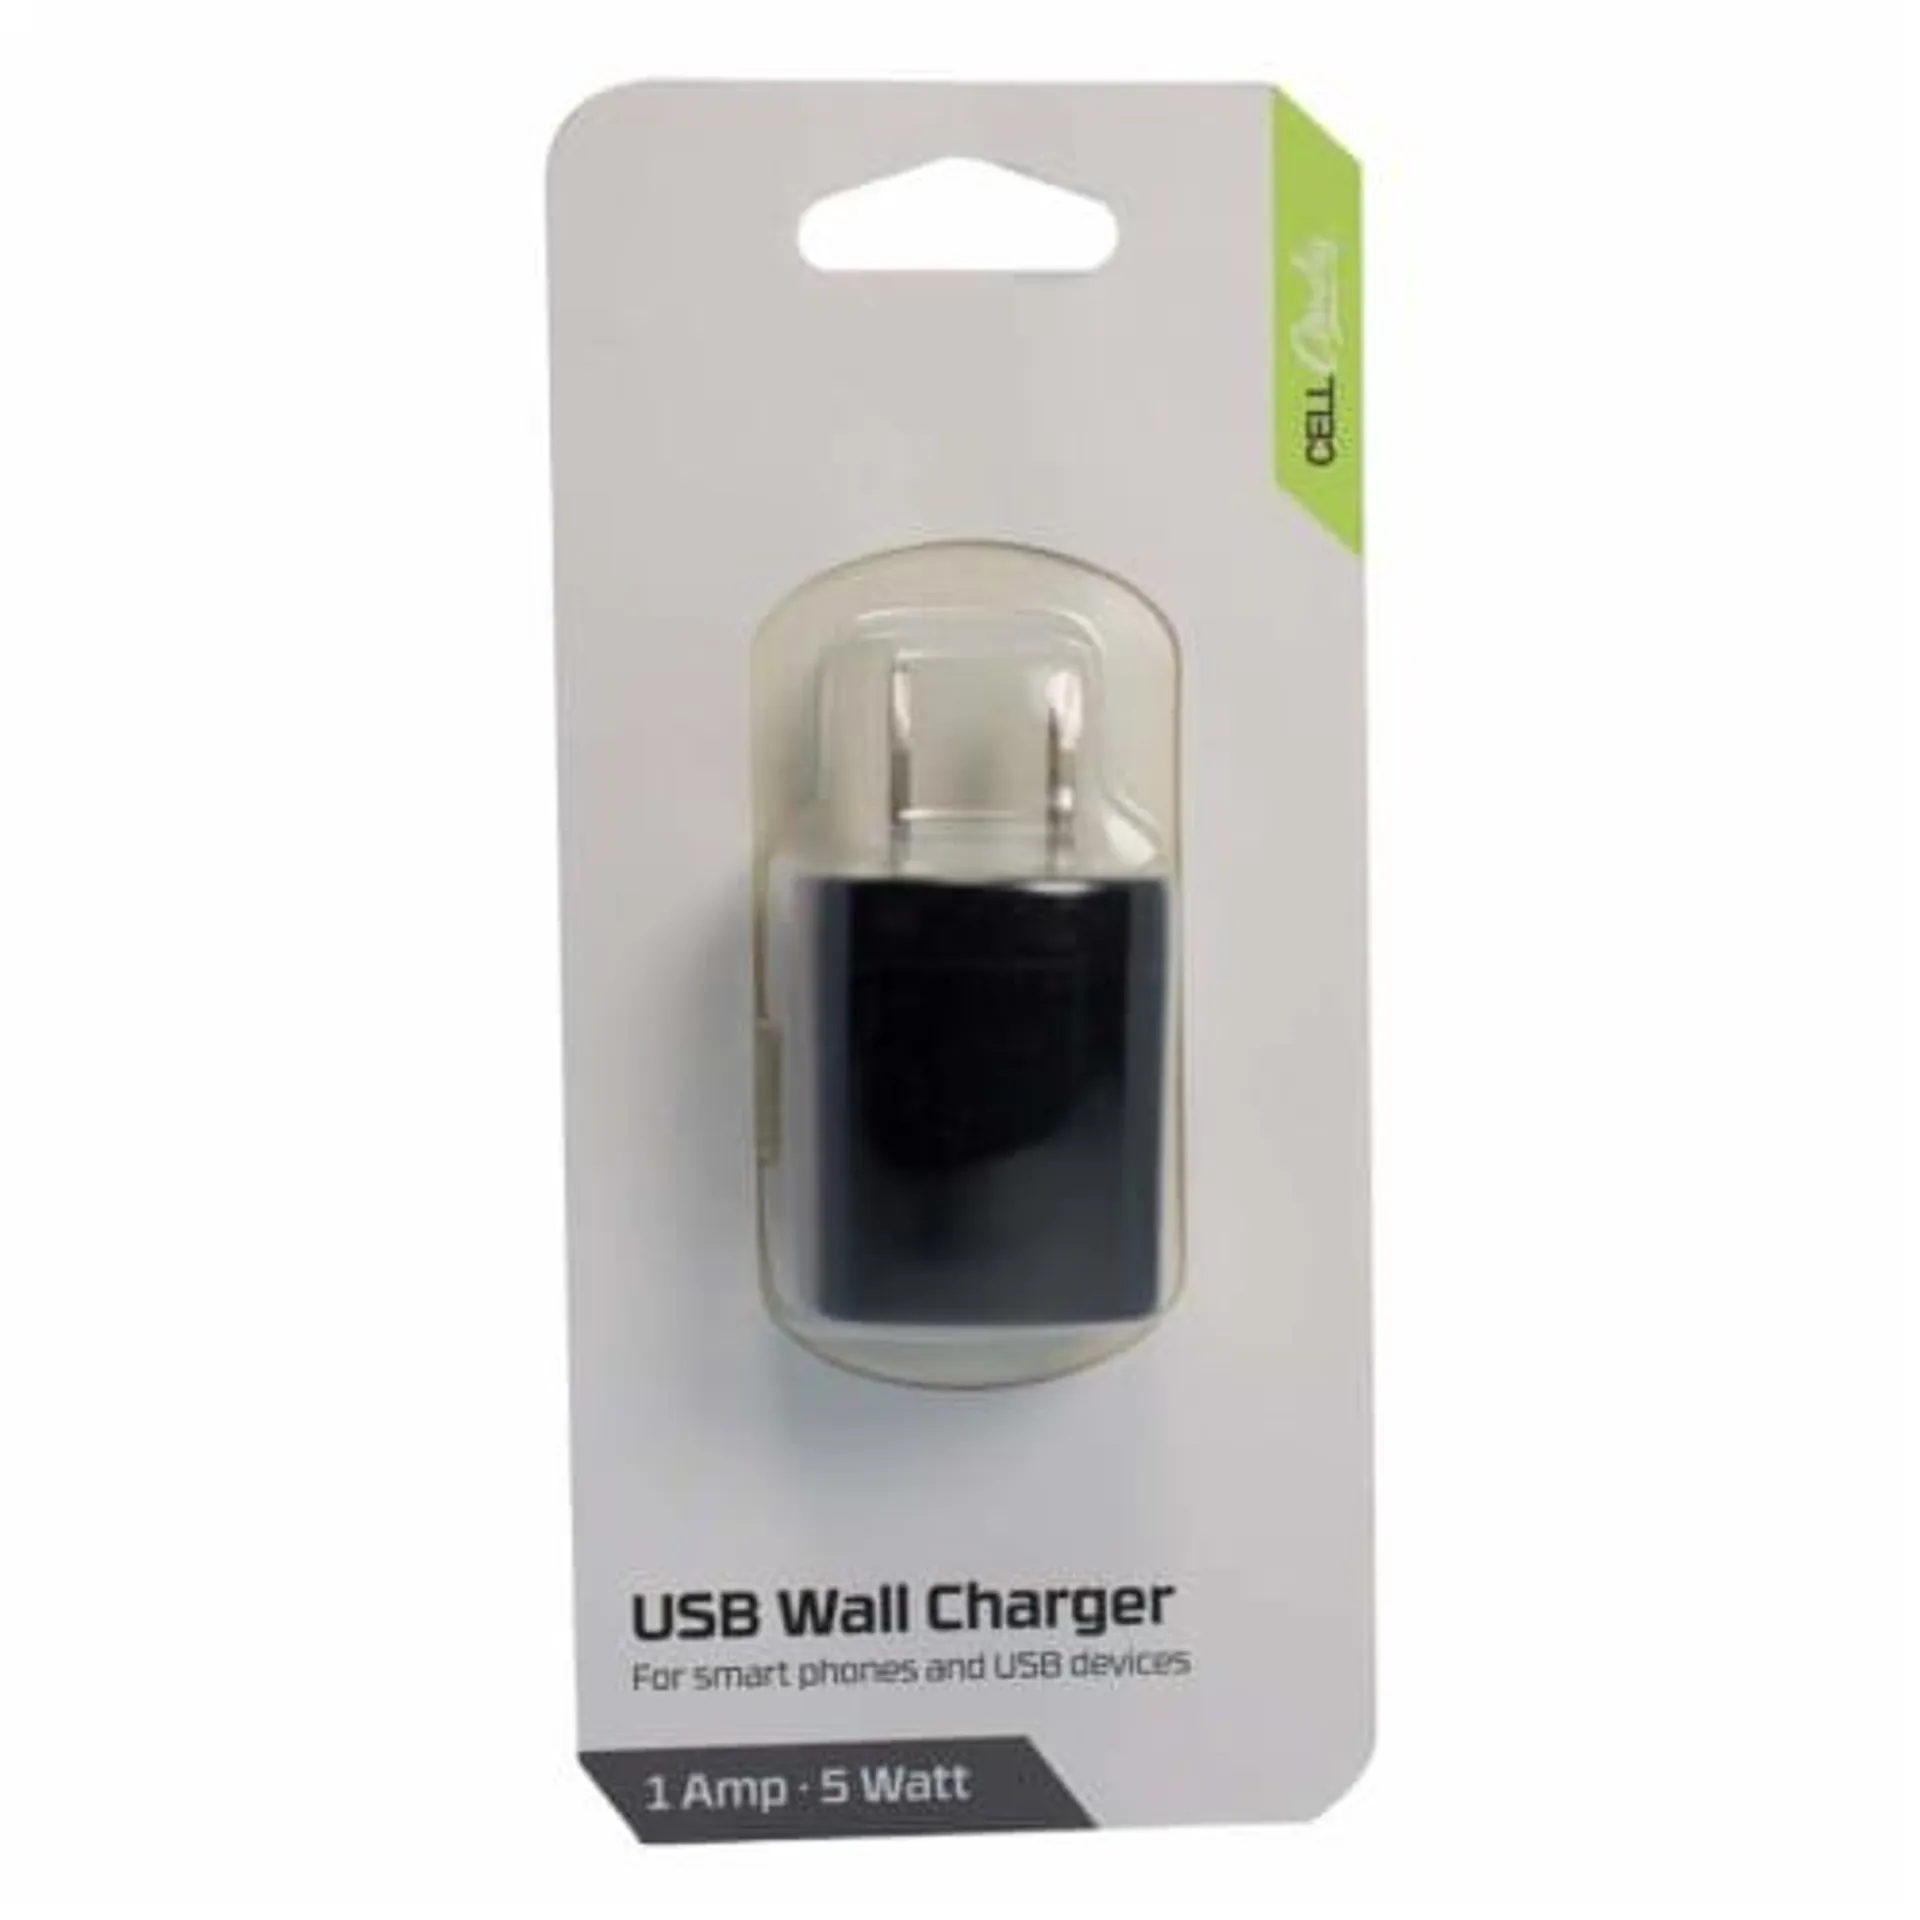 CELLCandy USB Wall Charger - Black